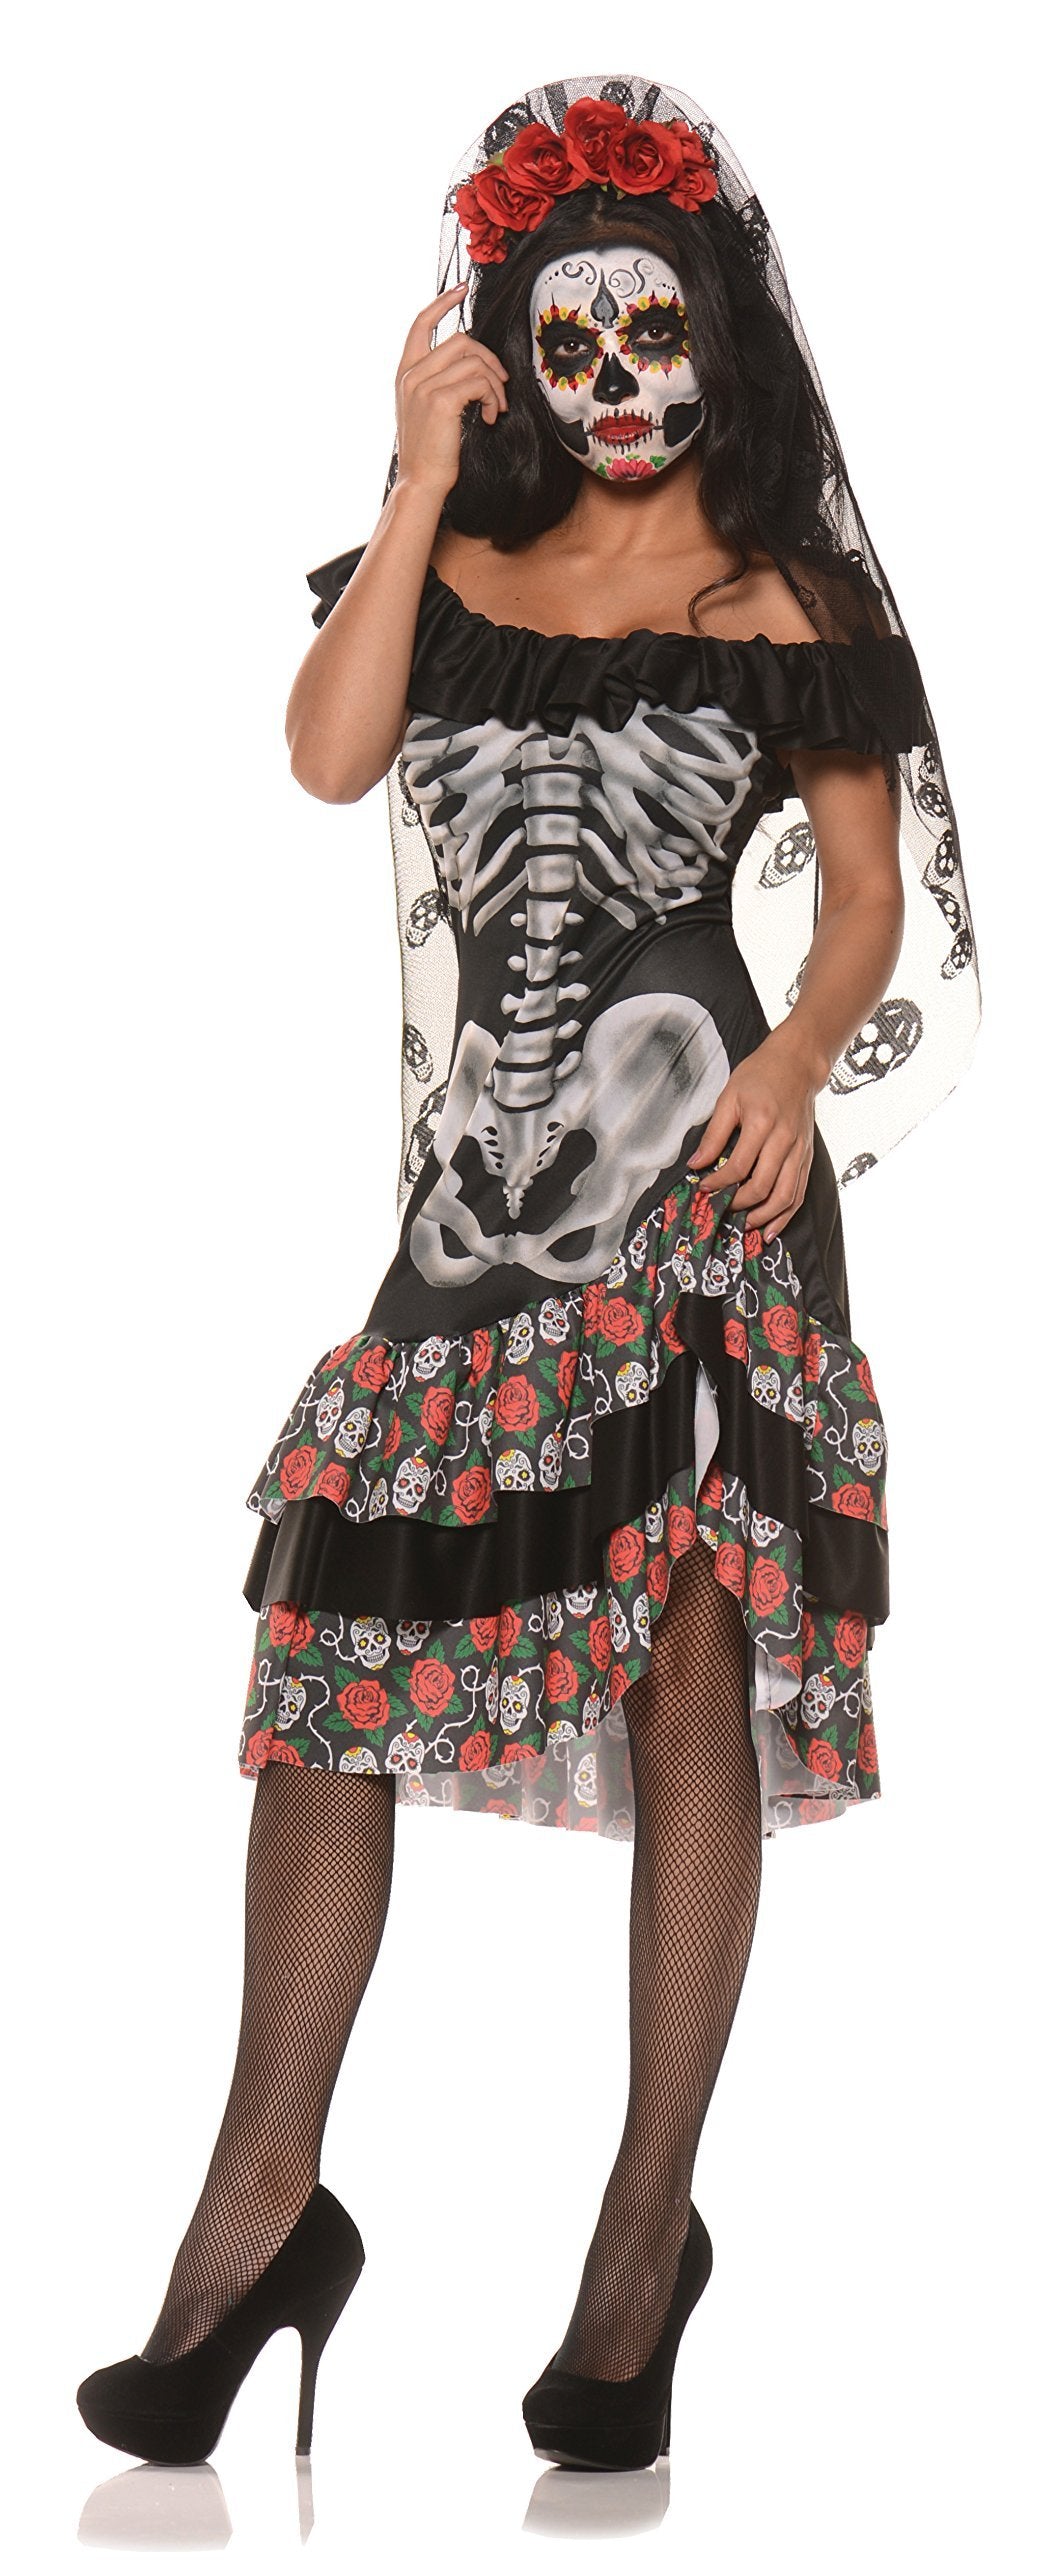 Queen of the Dead Costume XL Multi Size 18-20 FREE Shipping & Returns